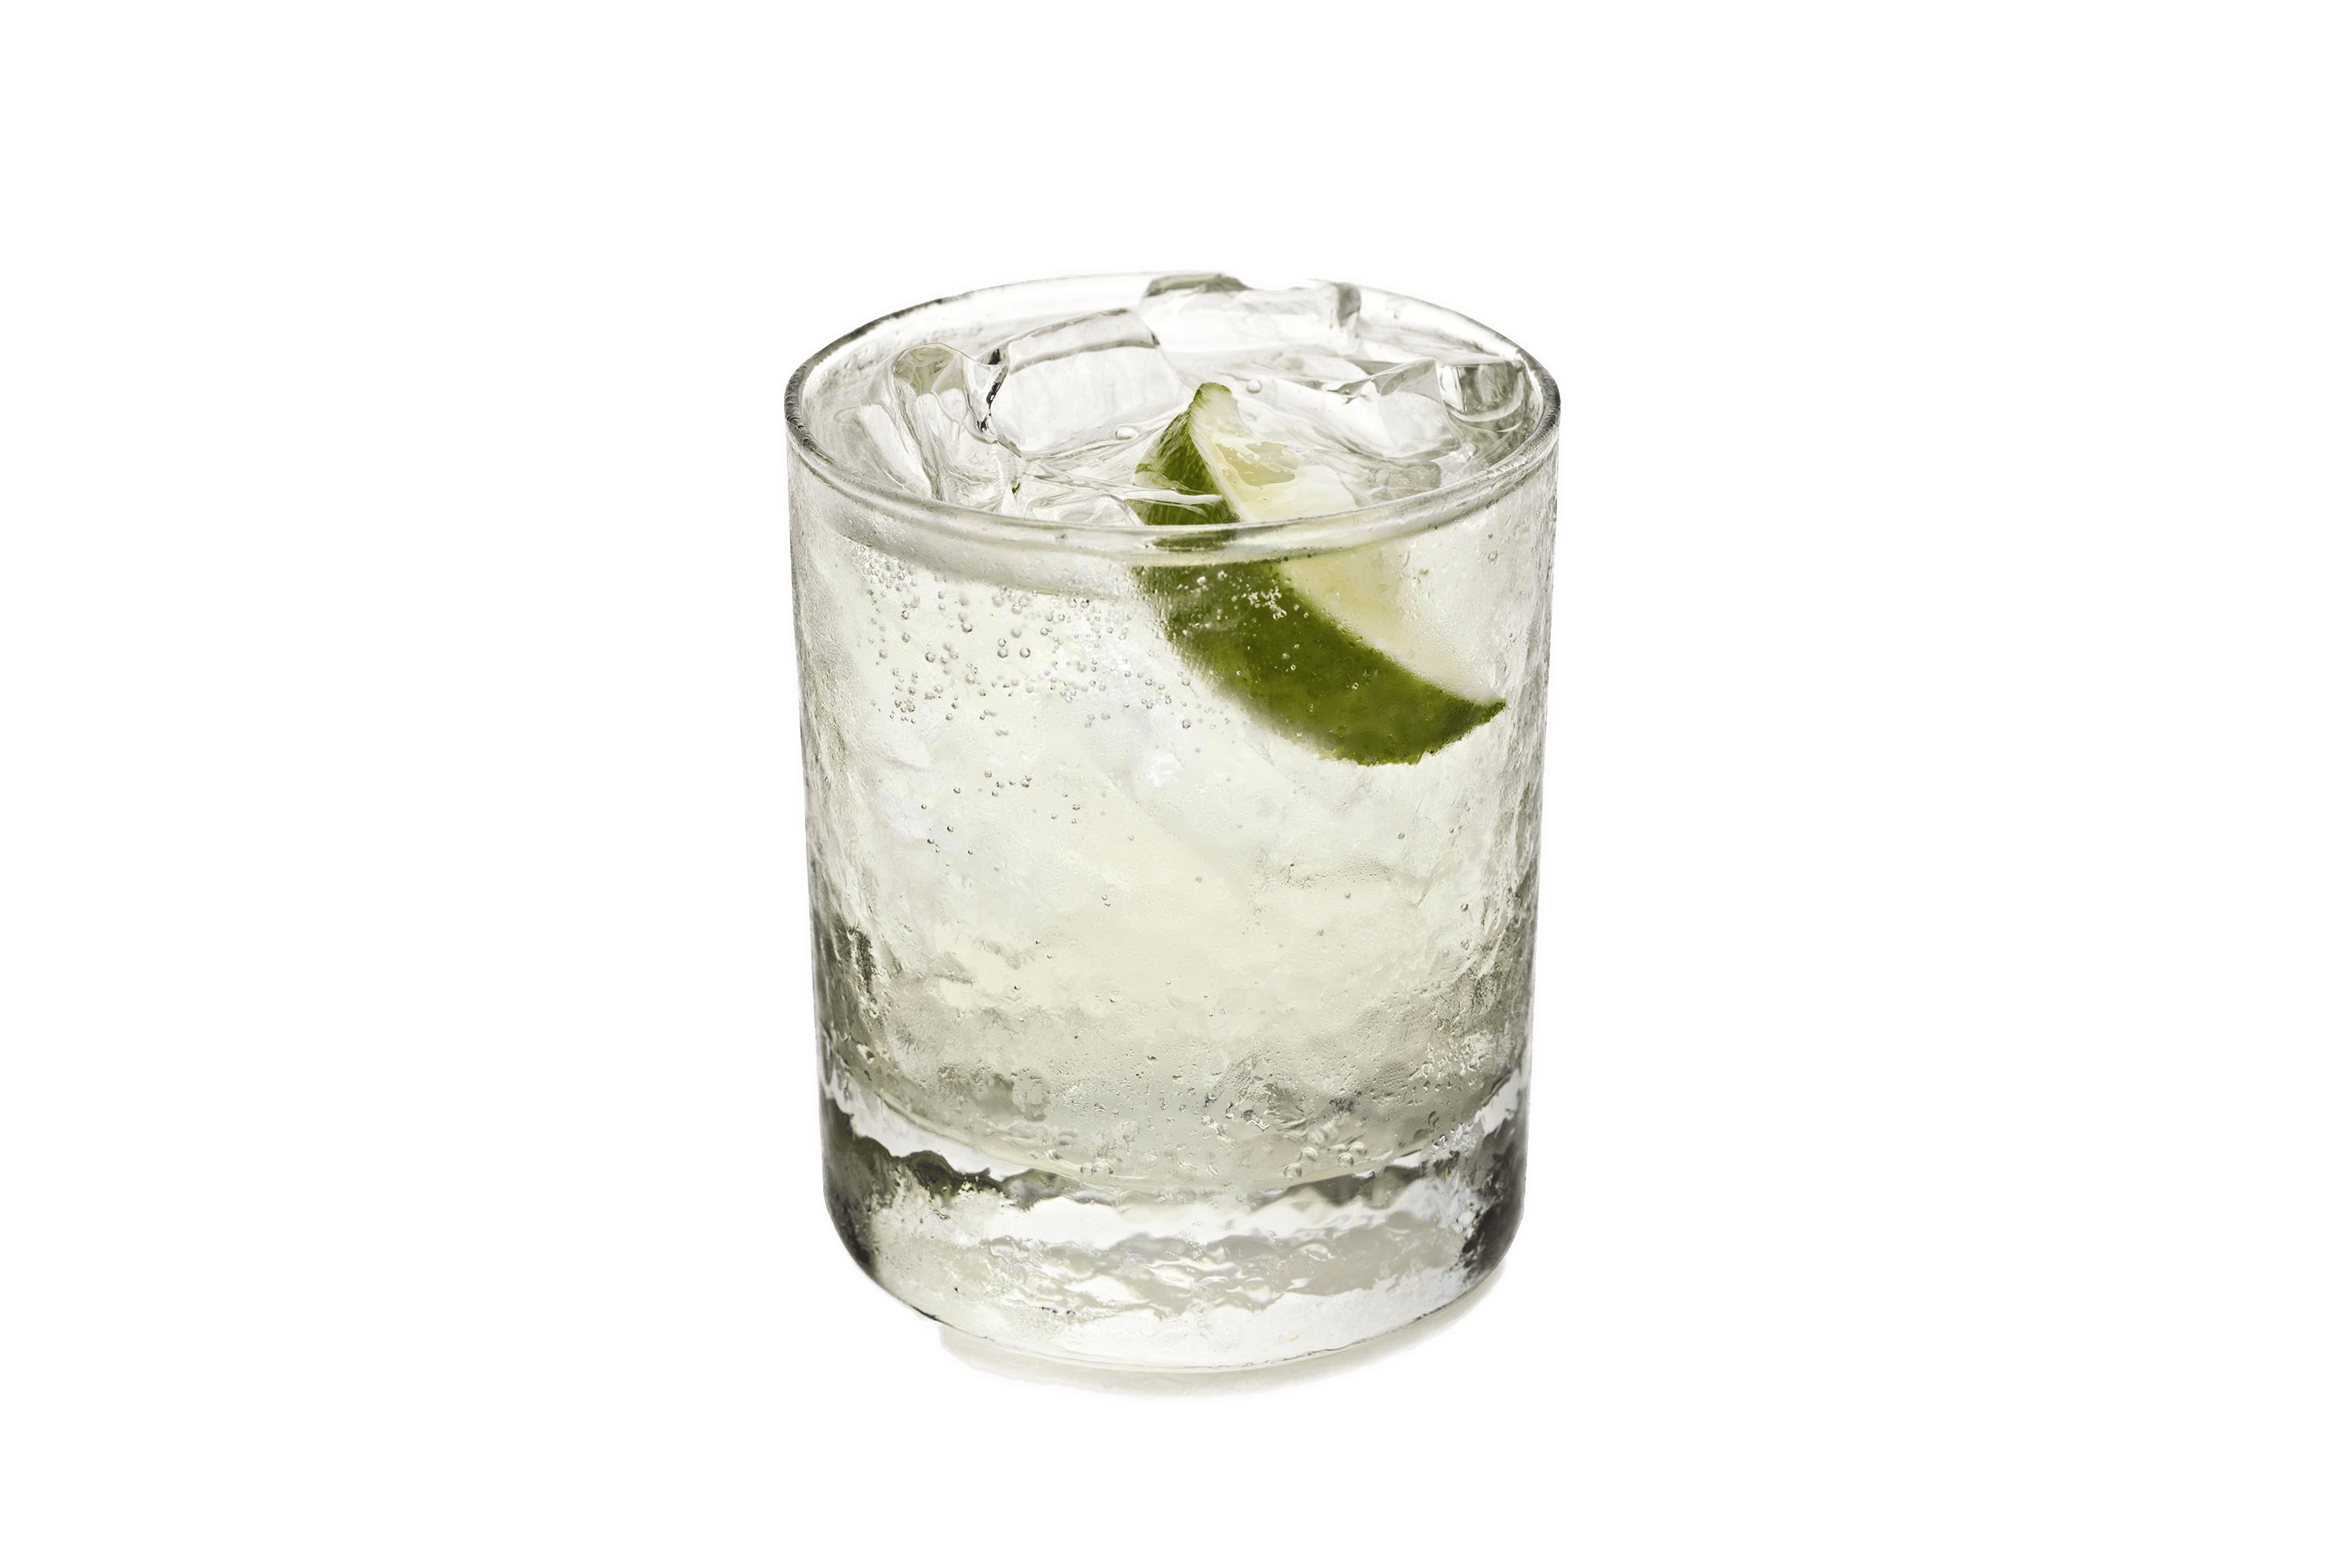 404) Gin and Tonic